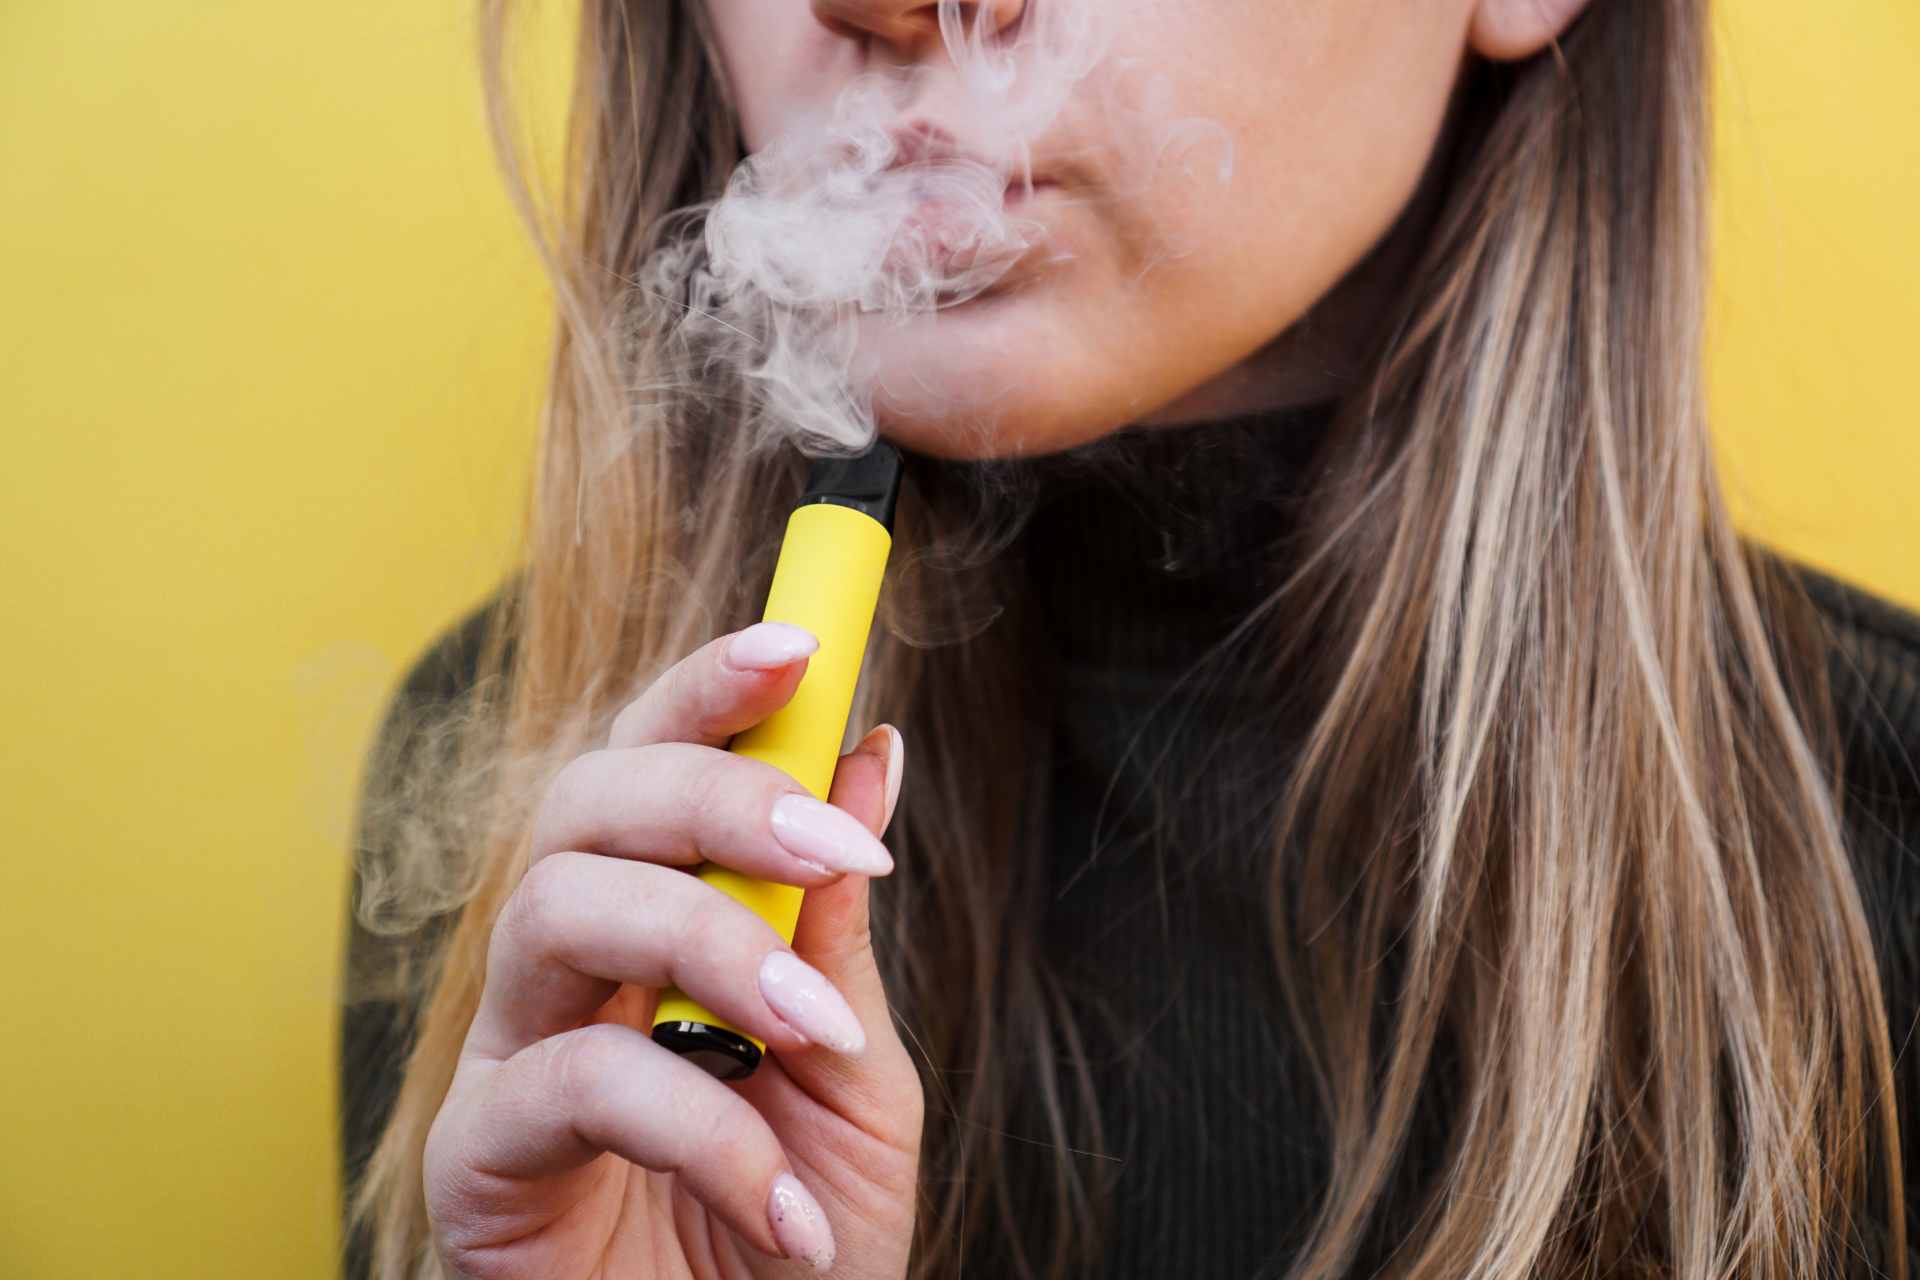 A woman using a yellow disposable vape